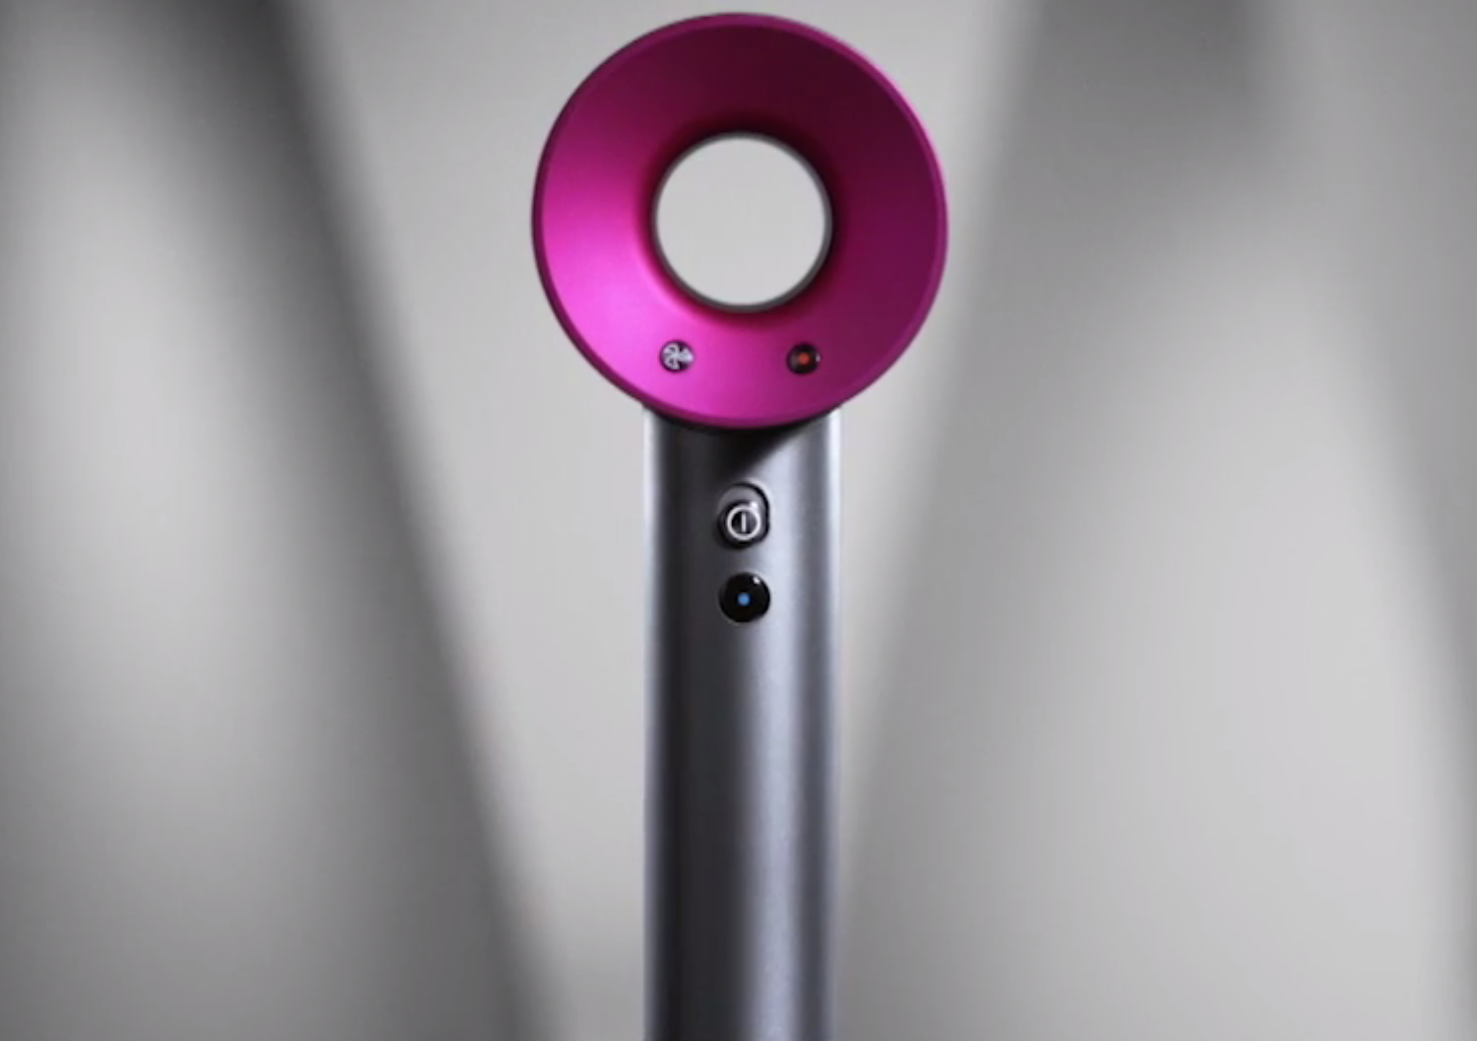 The Dyson Supersonic